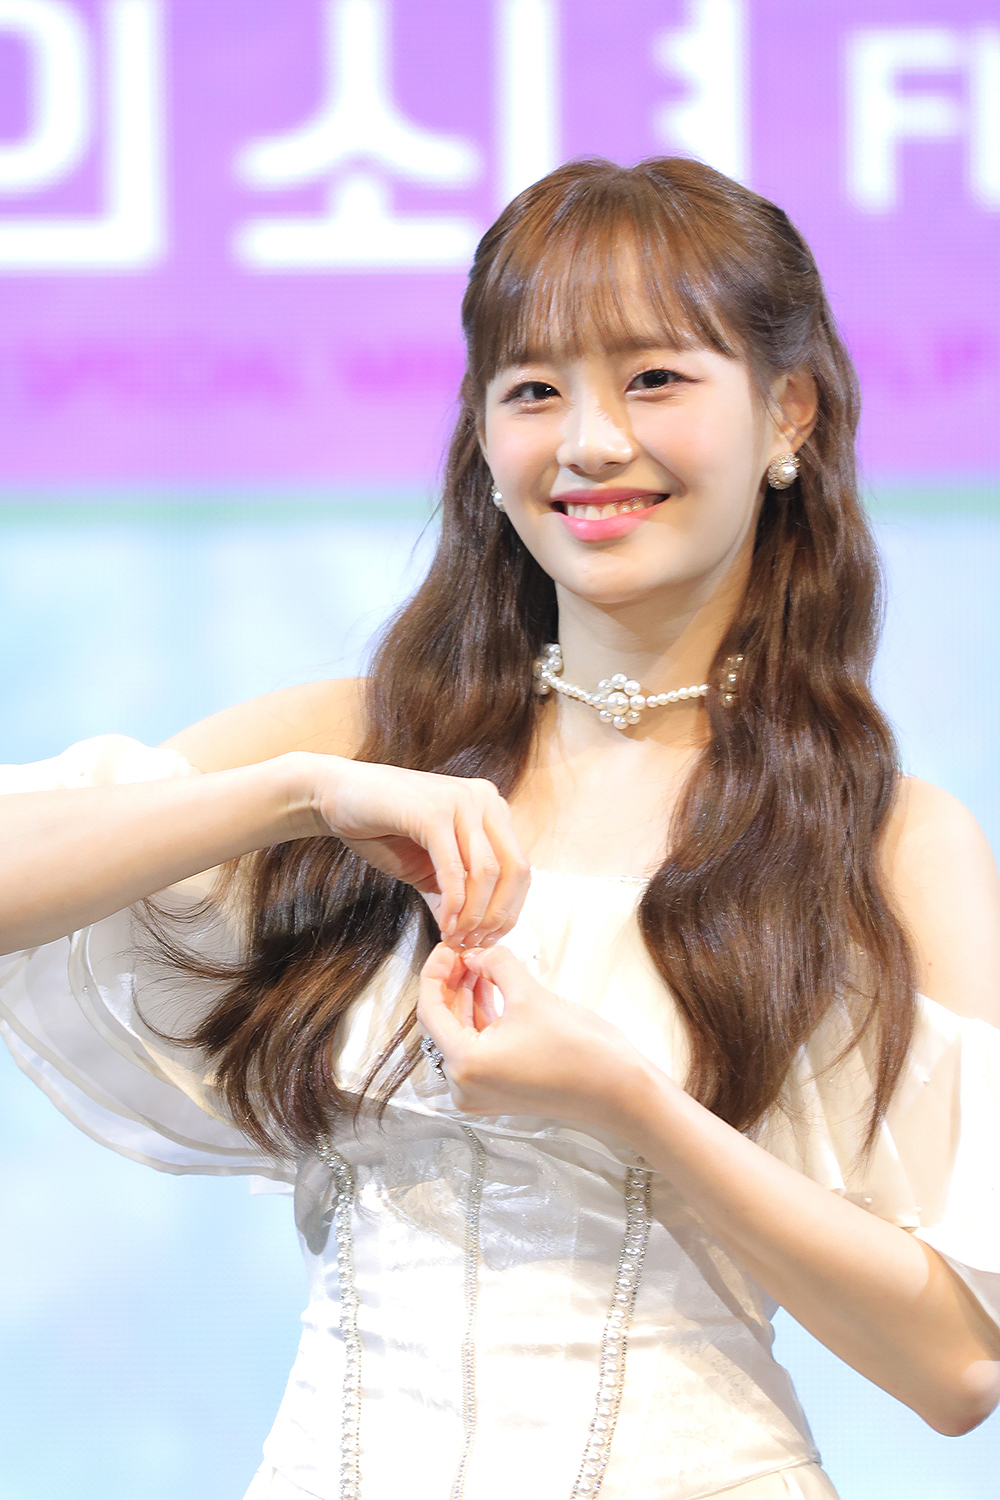 Chuu poses during Loona's press conference for its special album 